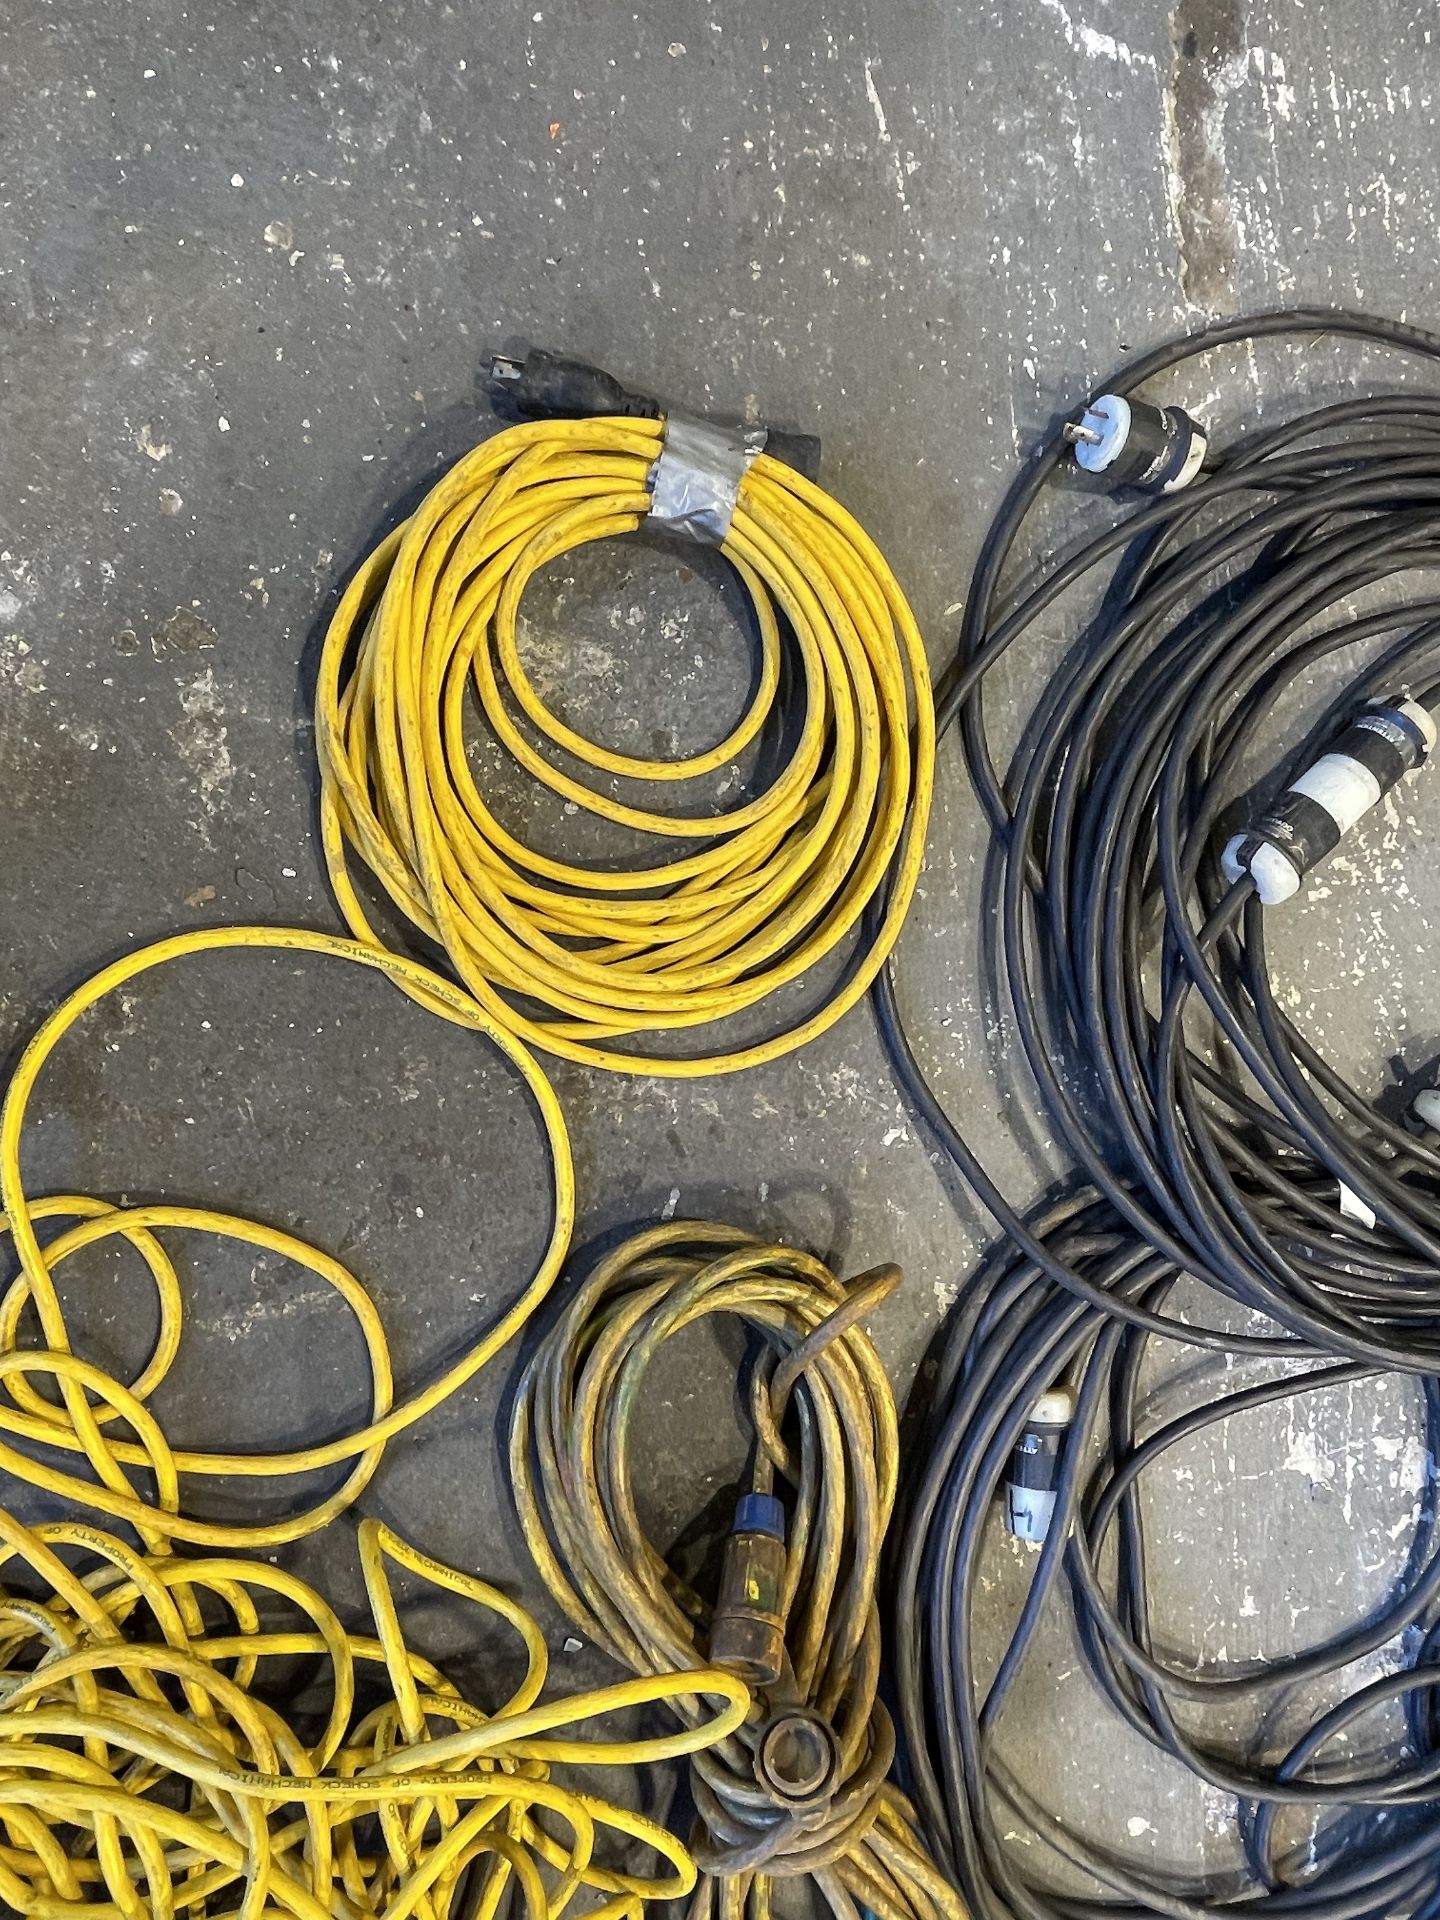 Lot of Extension Cords - Upland - Image 8 of 11